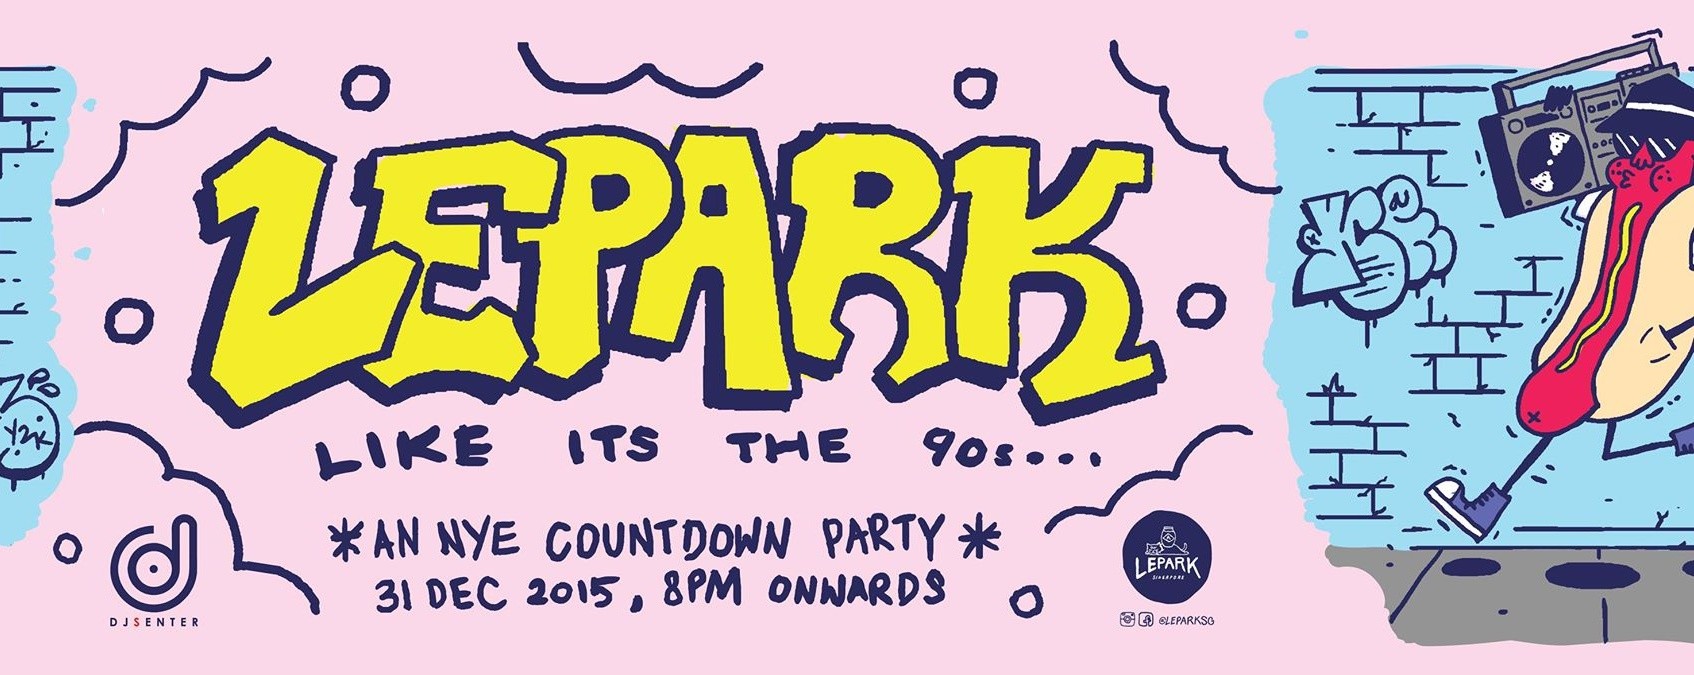 A NYE Party - Lepark like its the 90s